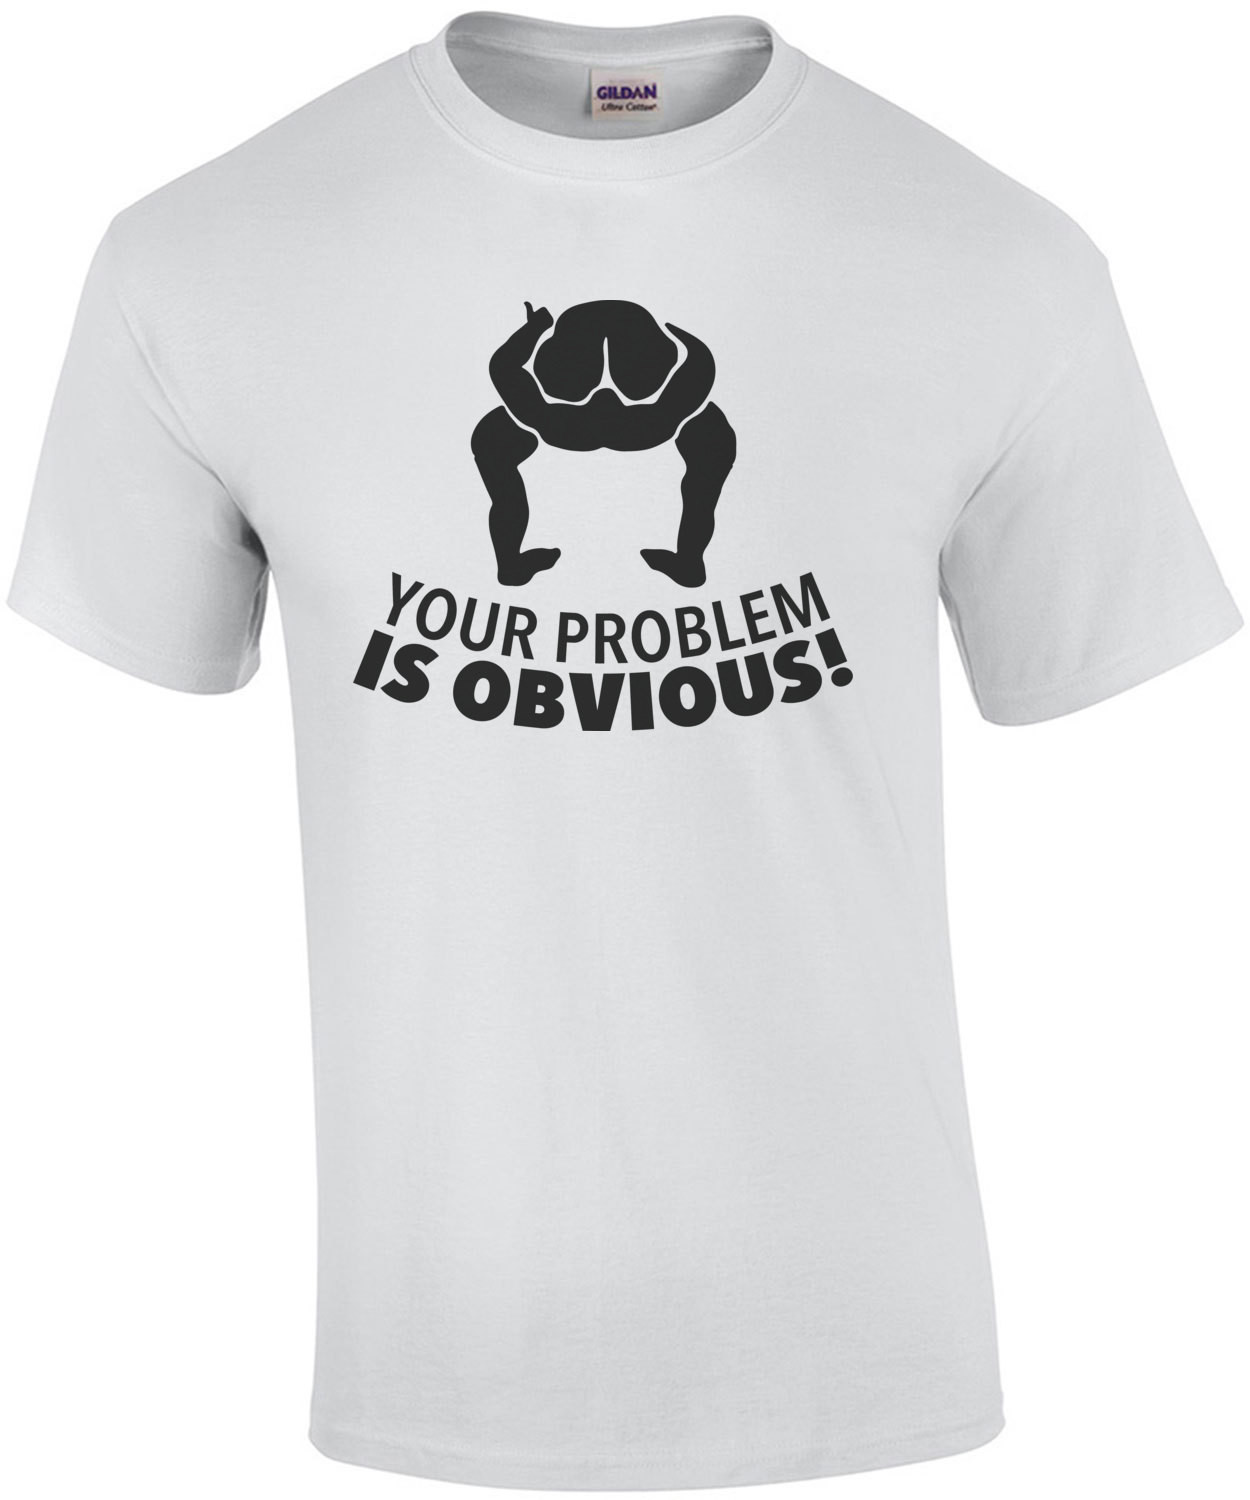 Your problem is obvious - head up ass - insult t-shirt